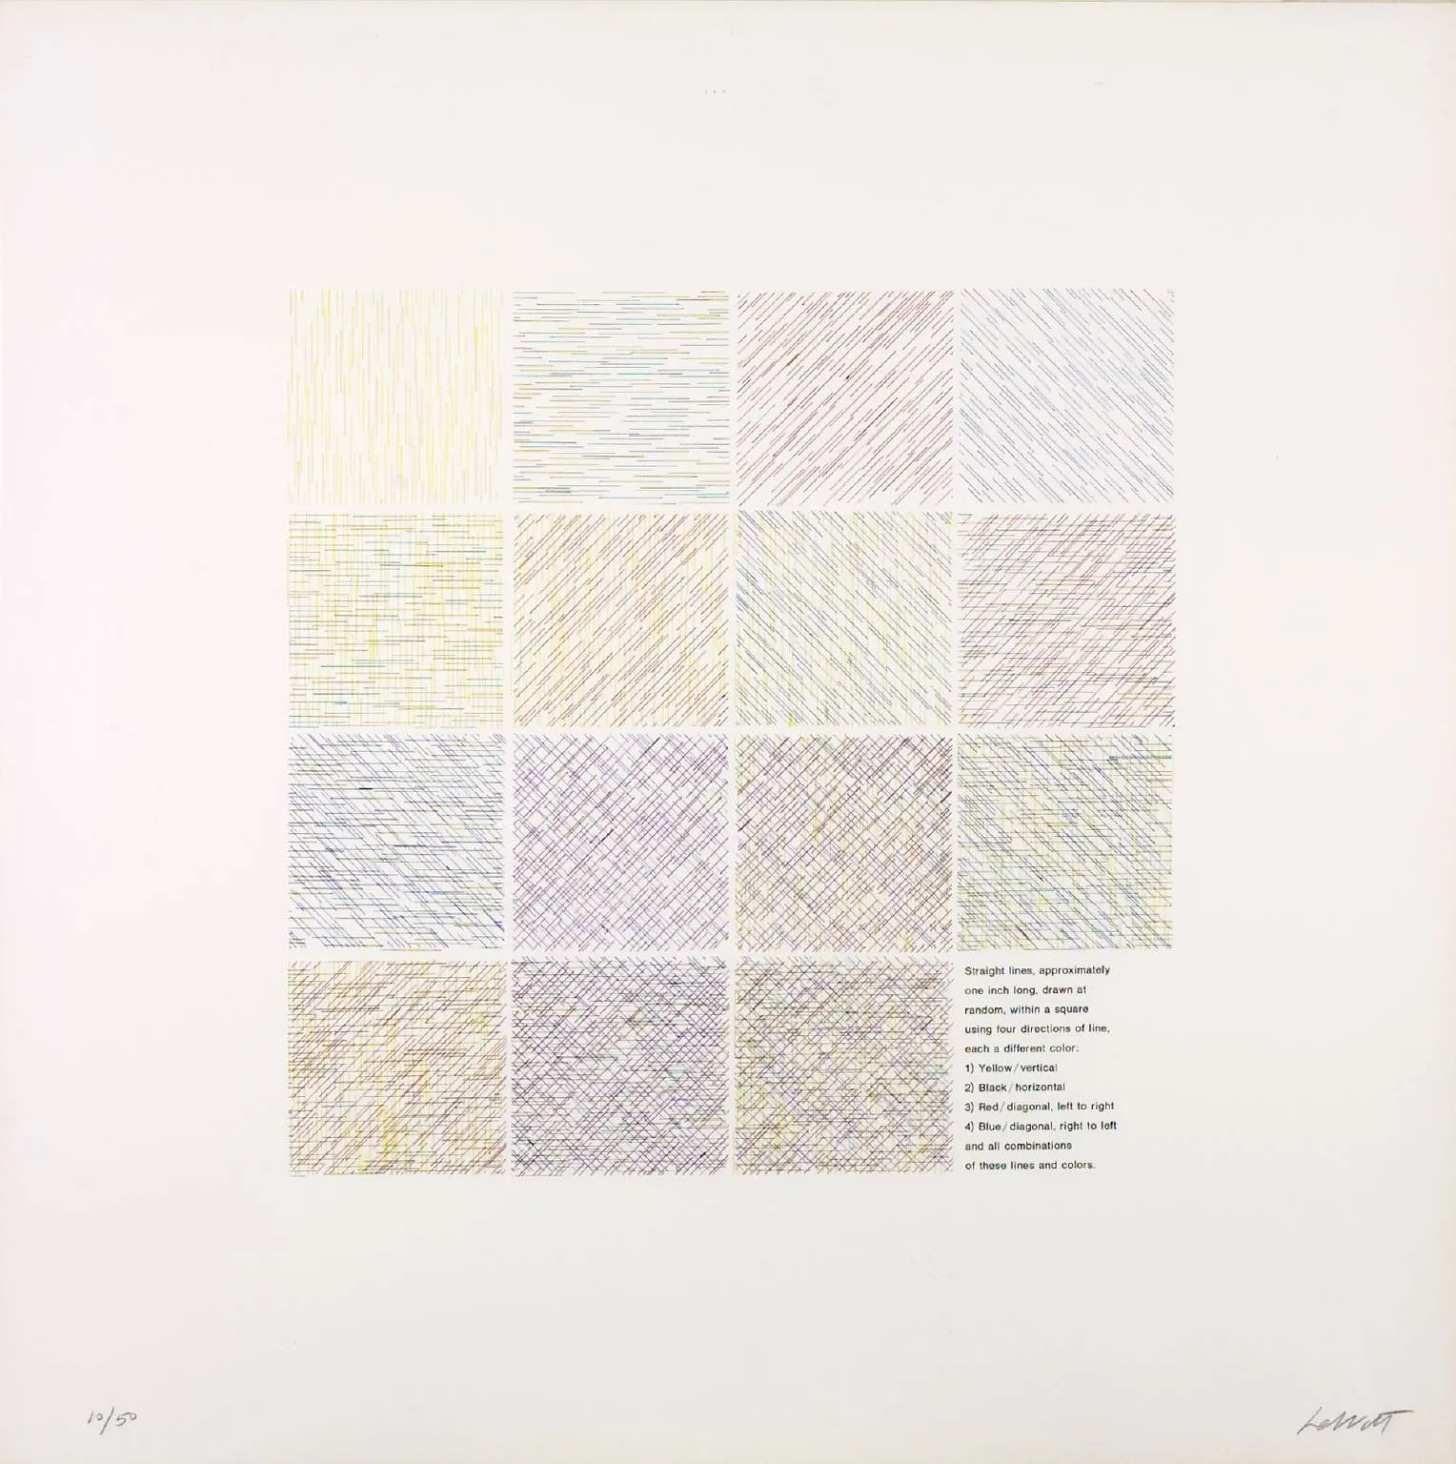 https://publicdelivery.org/wp-content/uploads/2013/07/Sol-LeWitt-–-Lines-of-One-Inch-Four-Directions-Four-Colours-set-of-16-1971.jpg?ezimgfmt=ng:webp/ngcb35